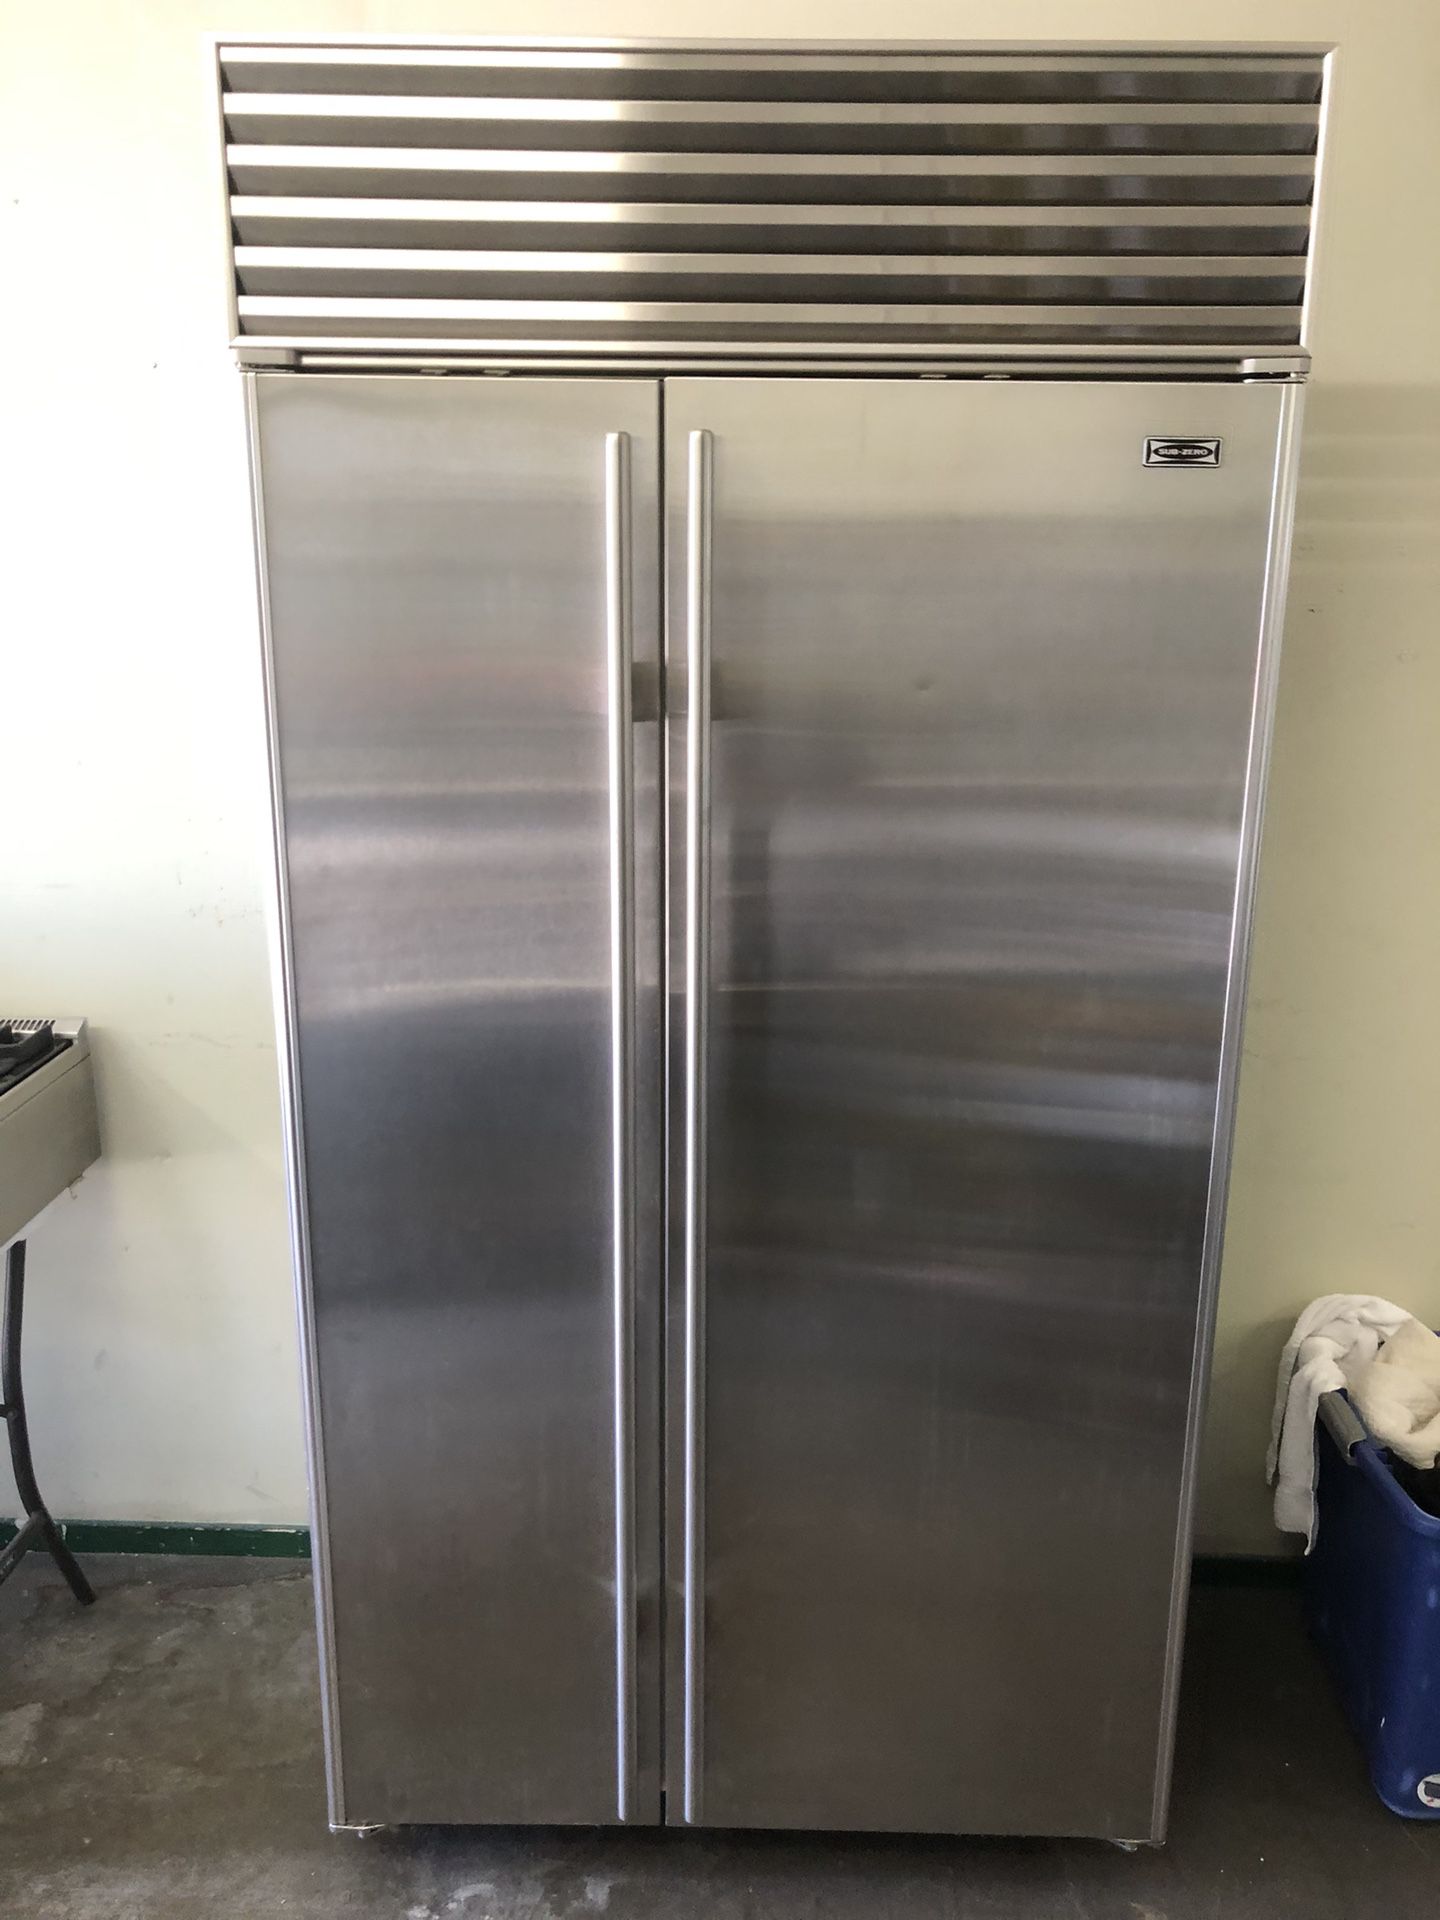 Sub Zero 42” Stainless Steel Built In Side By Side Refrigerator 